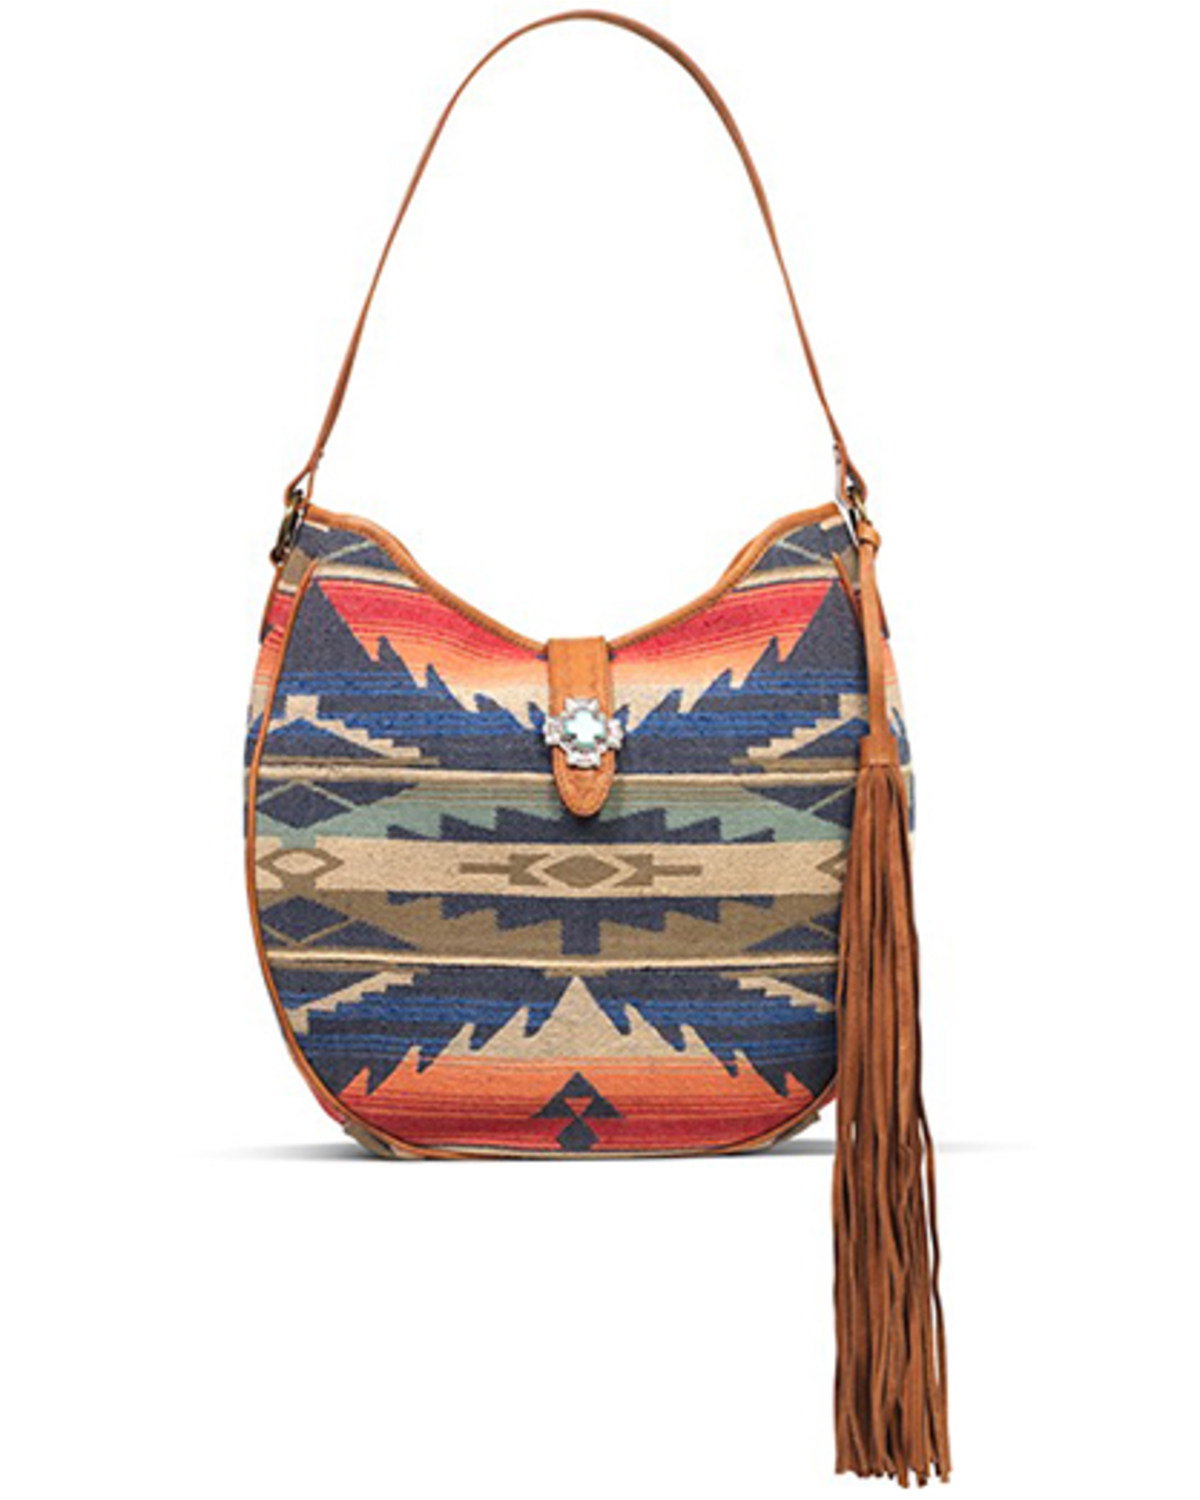 Ariat Women's Southwestern Concealed Carry Hobo Bag